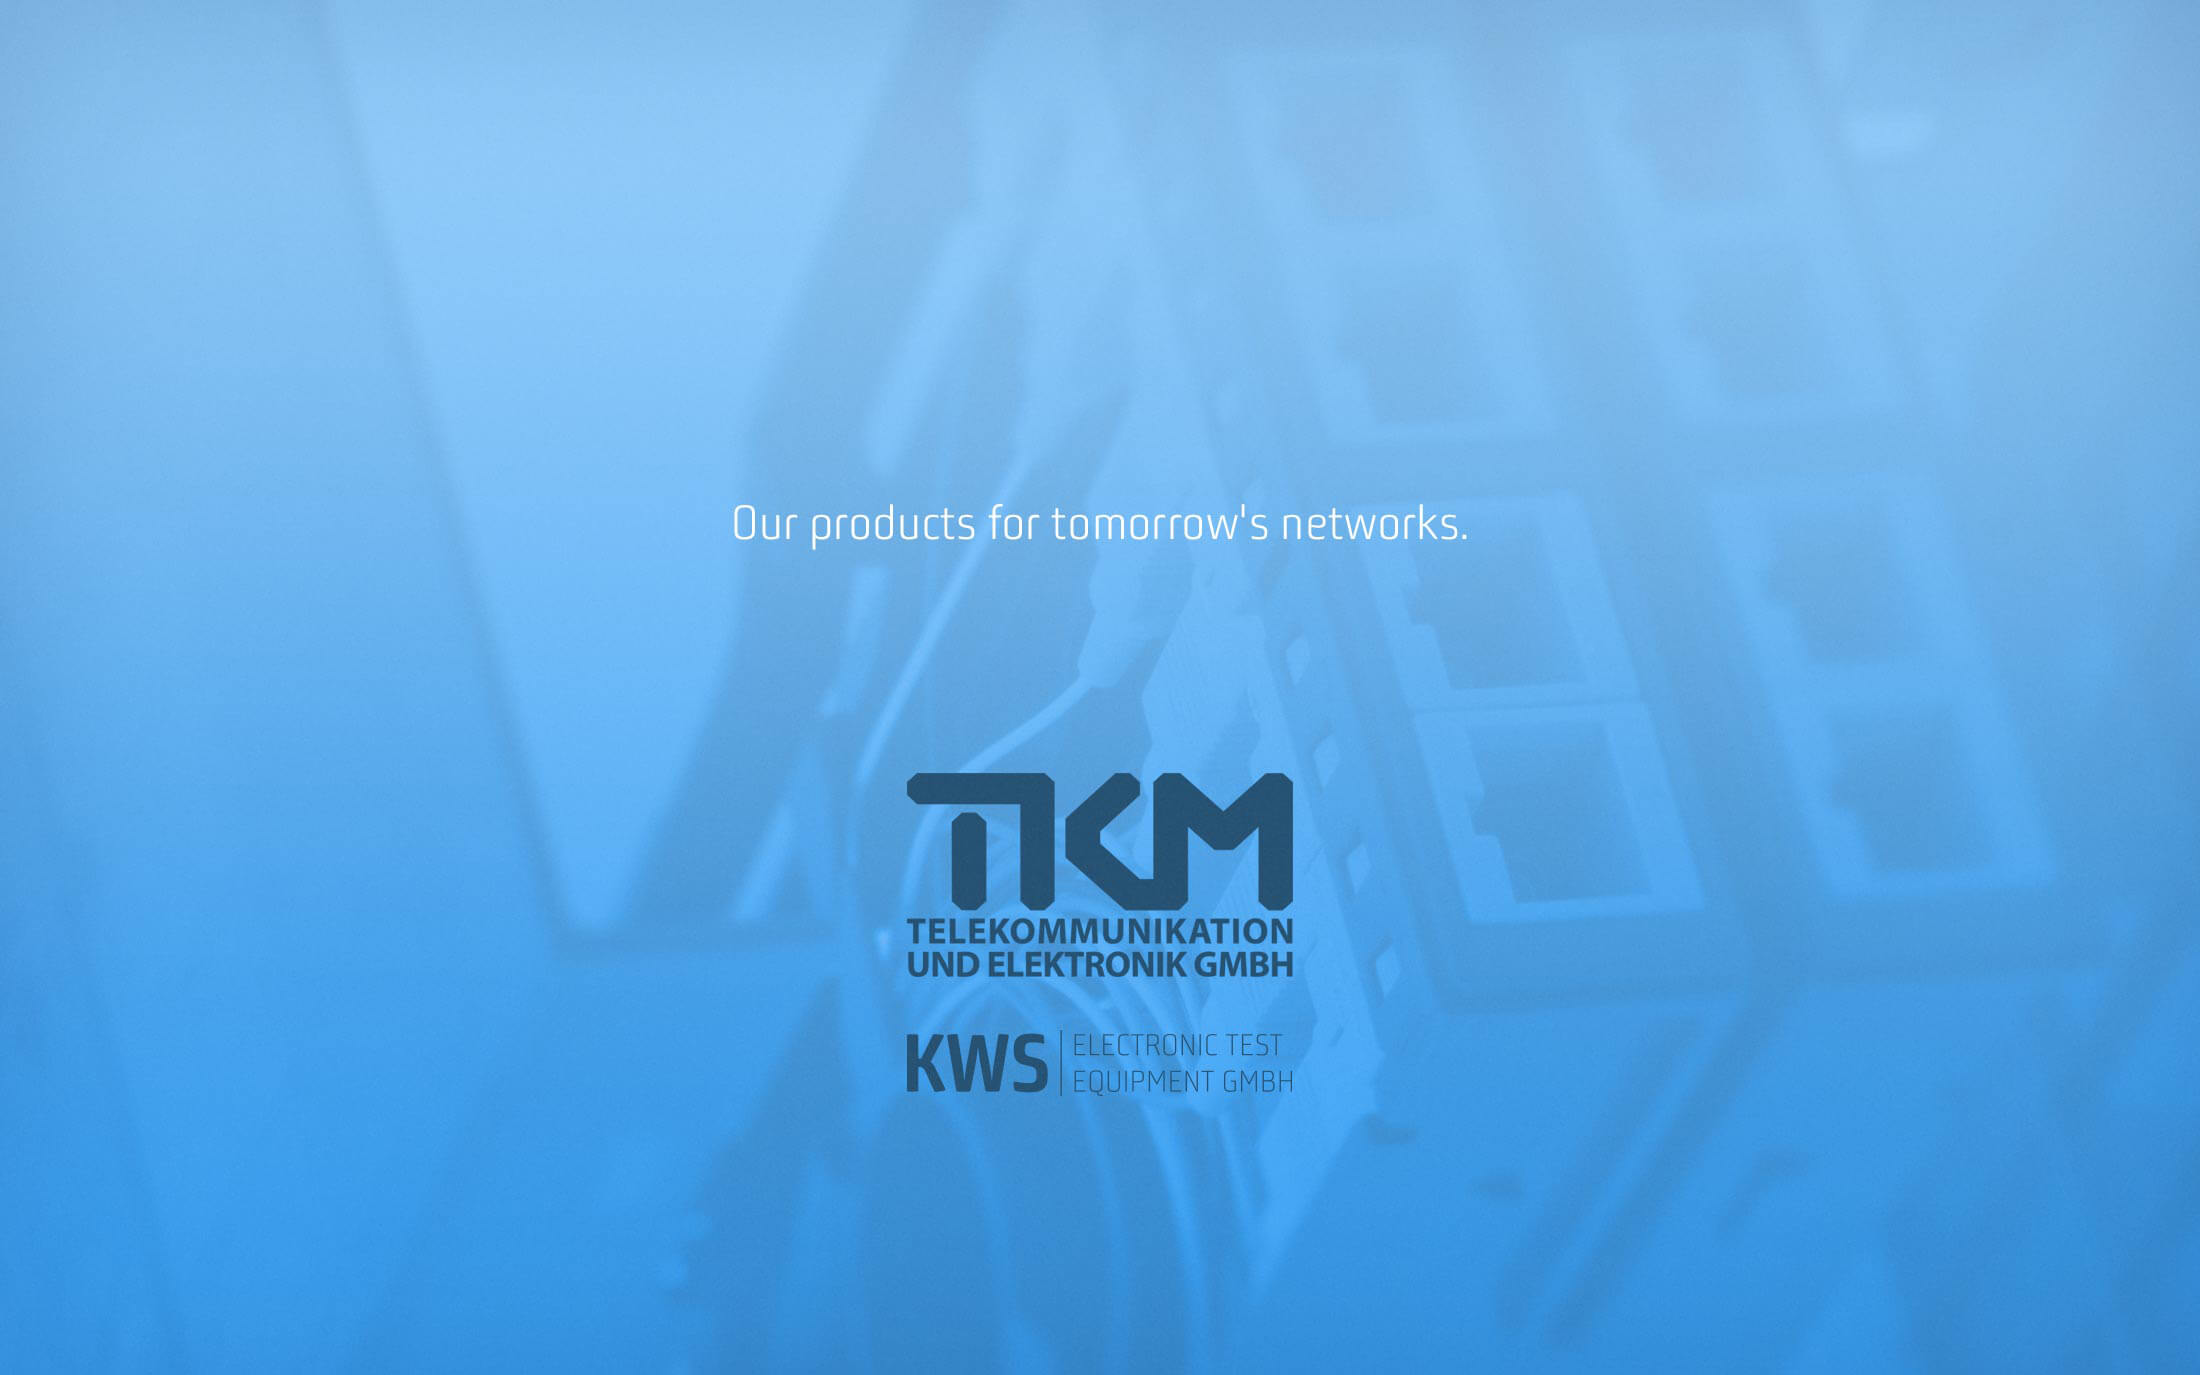 KWS Electronic News 2020: Our TKM products are online